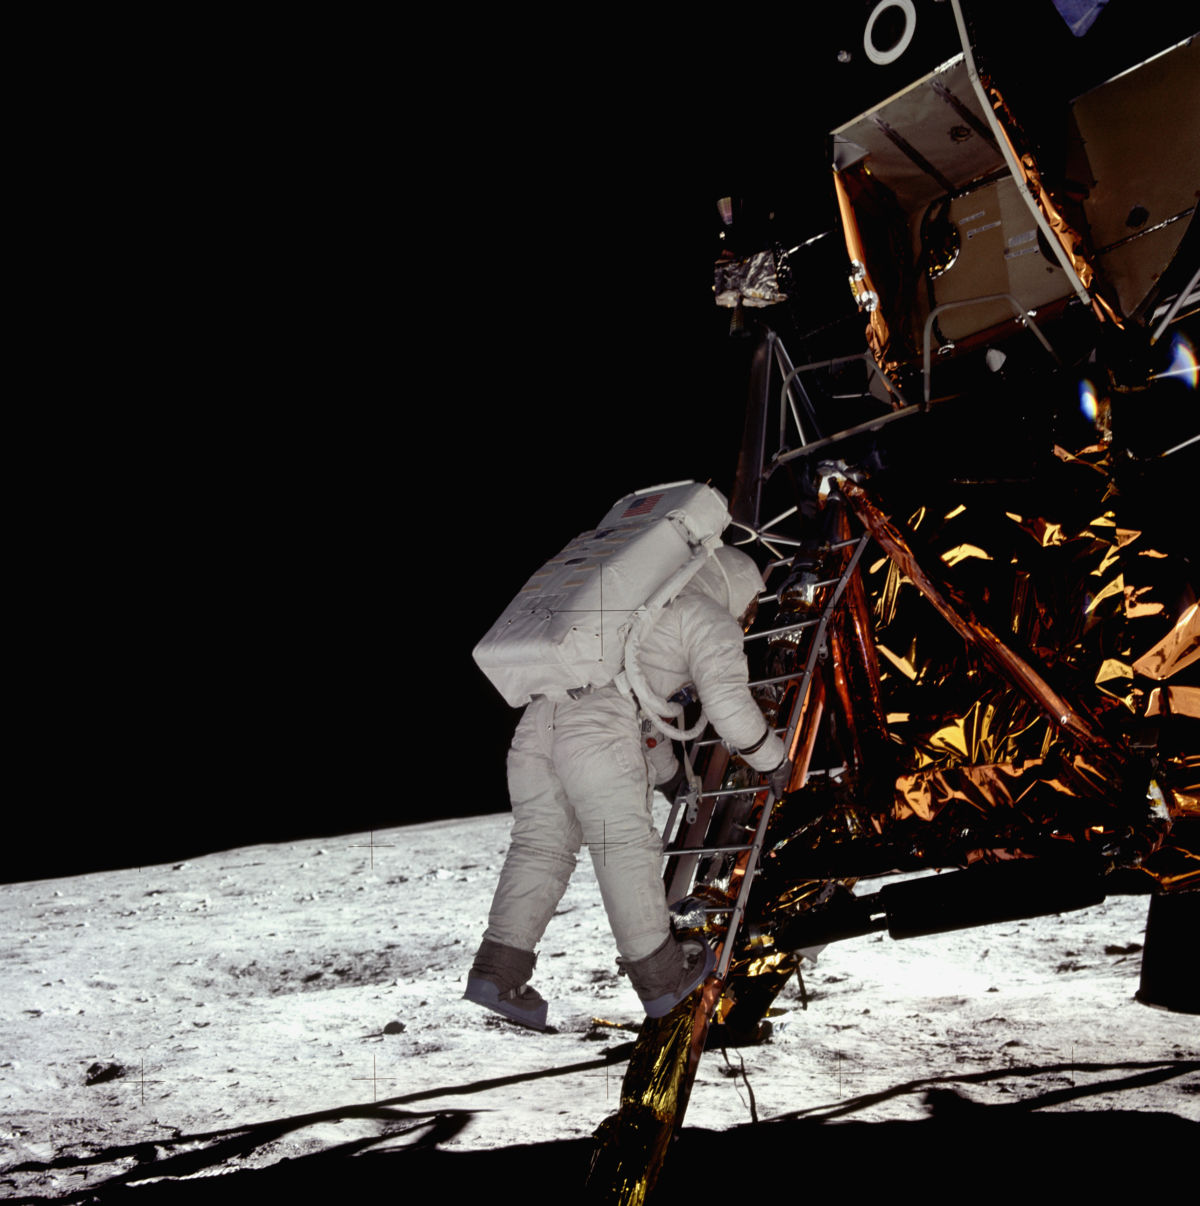 Apollo 11 astronaut Buzz Aldrin takes his last step off the Eagle lunar module onto the surface of the Moon.